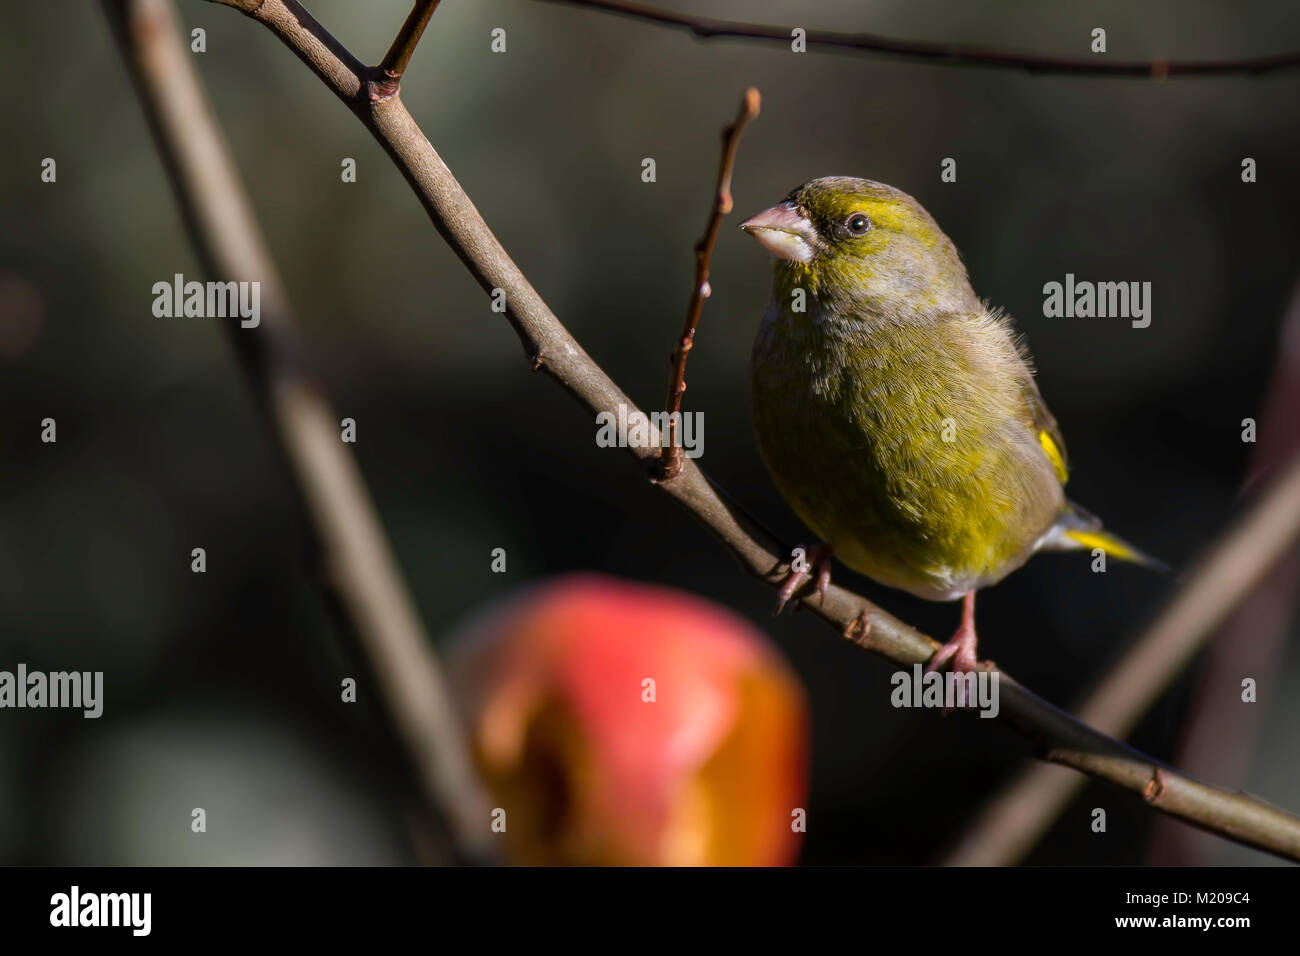 Green finch Perched Stock Photo